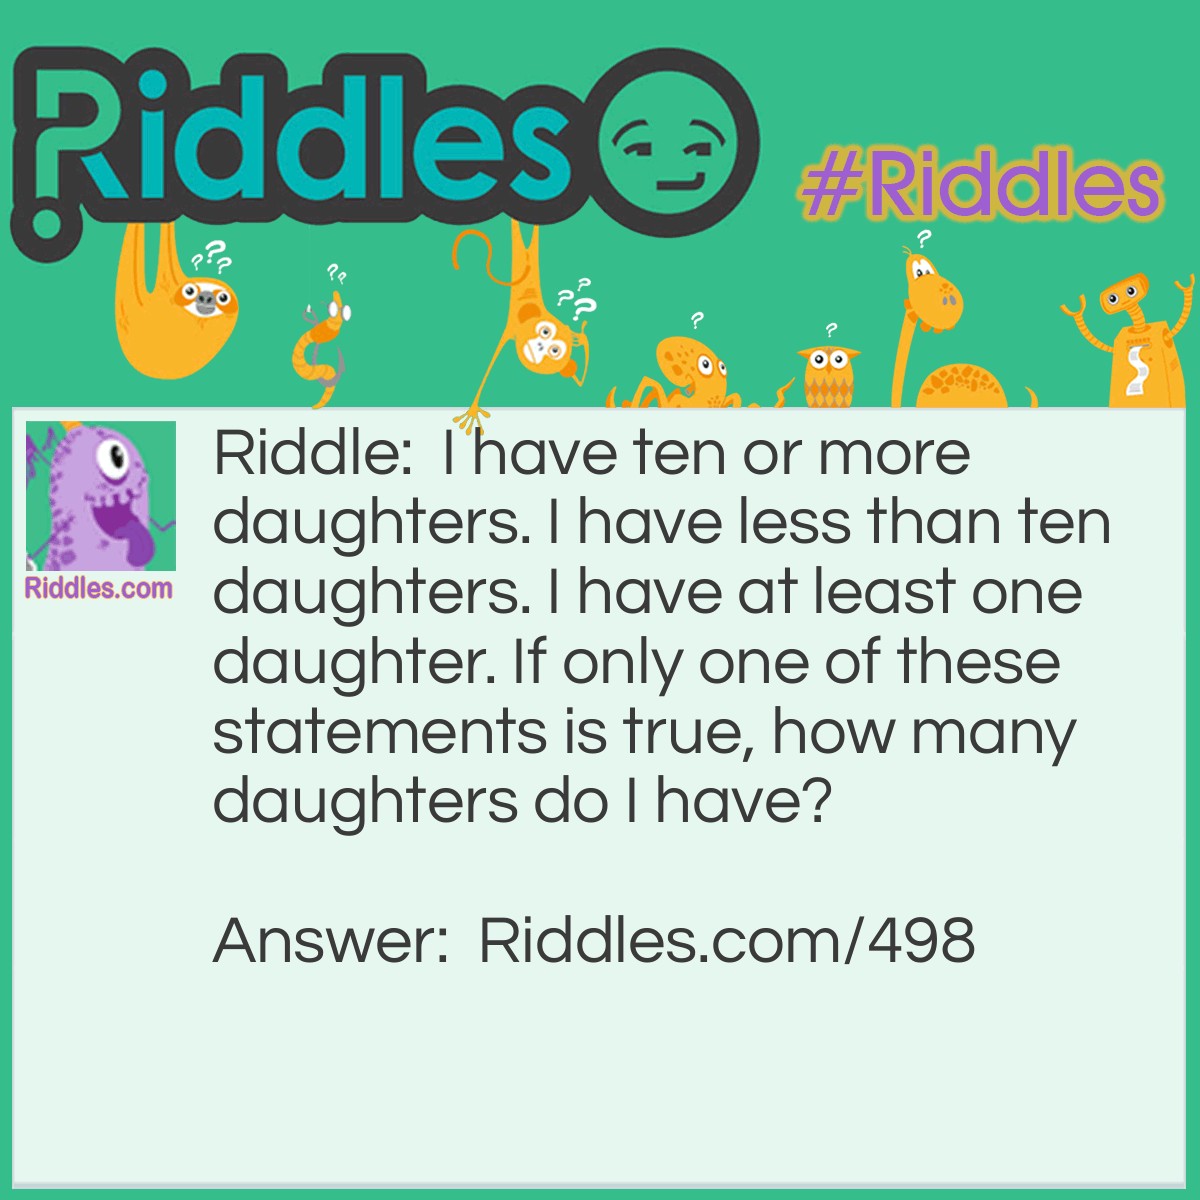 Riddle: I have ten or more daughters. I have less than ten daughters. I have at least one daughter. If only one of these statements is true, how many daughters do I have? Answer: If I have any daughters, there will always be two statements which are true. Therefore, I have no daughters.